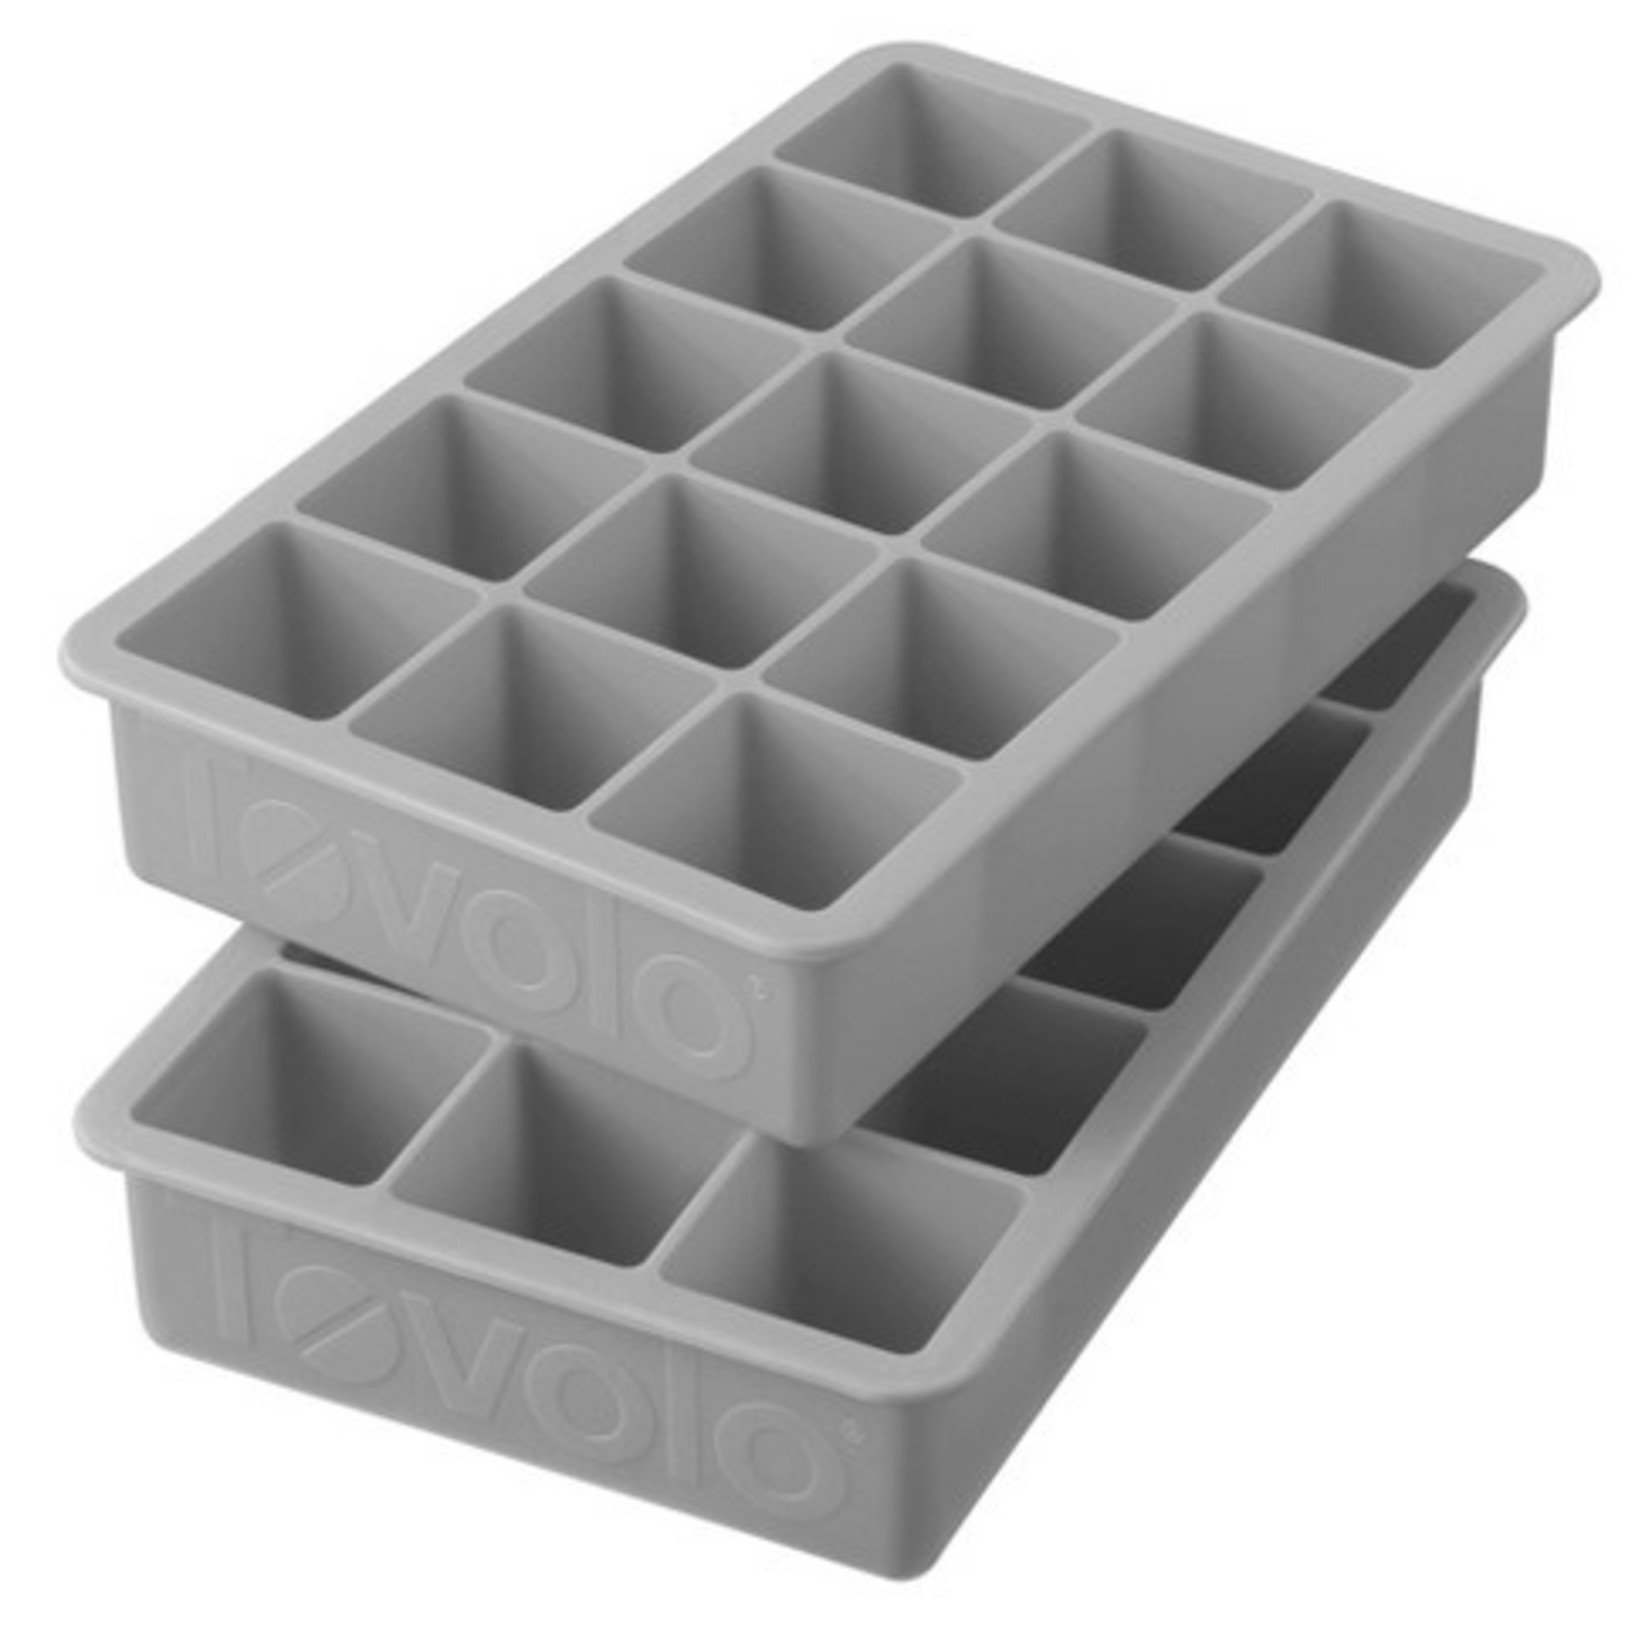 Tovolo Perfect Cube Ice Tray Oyster Grey